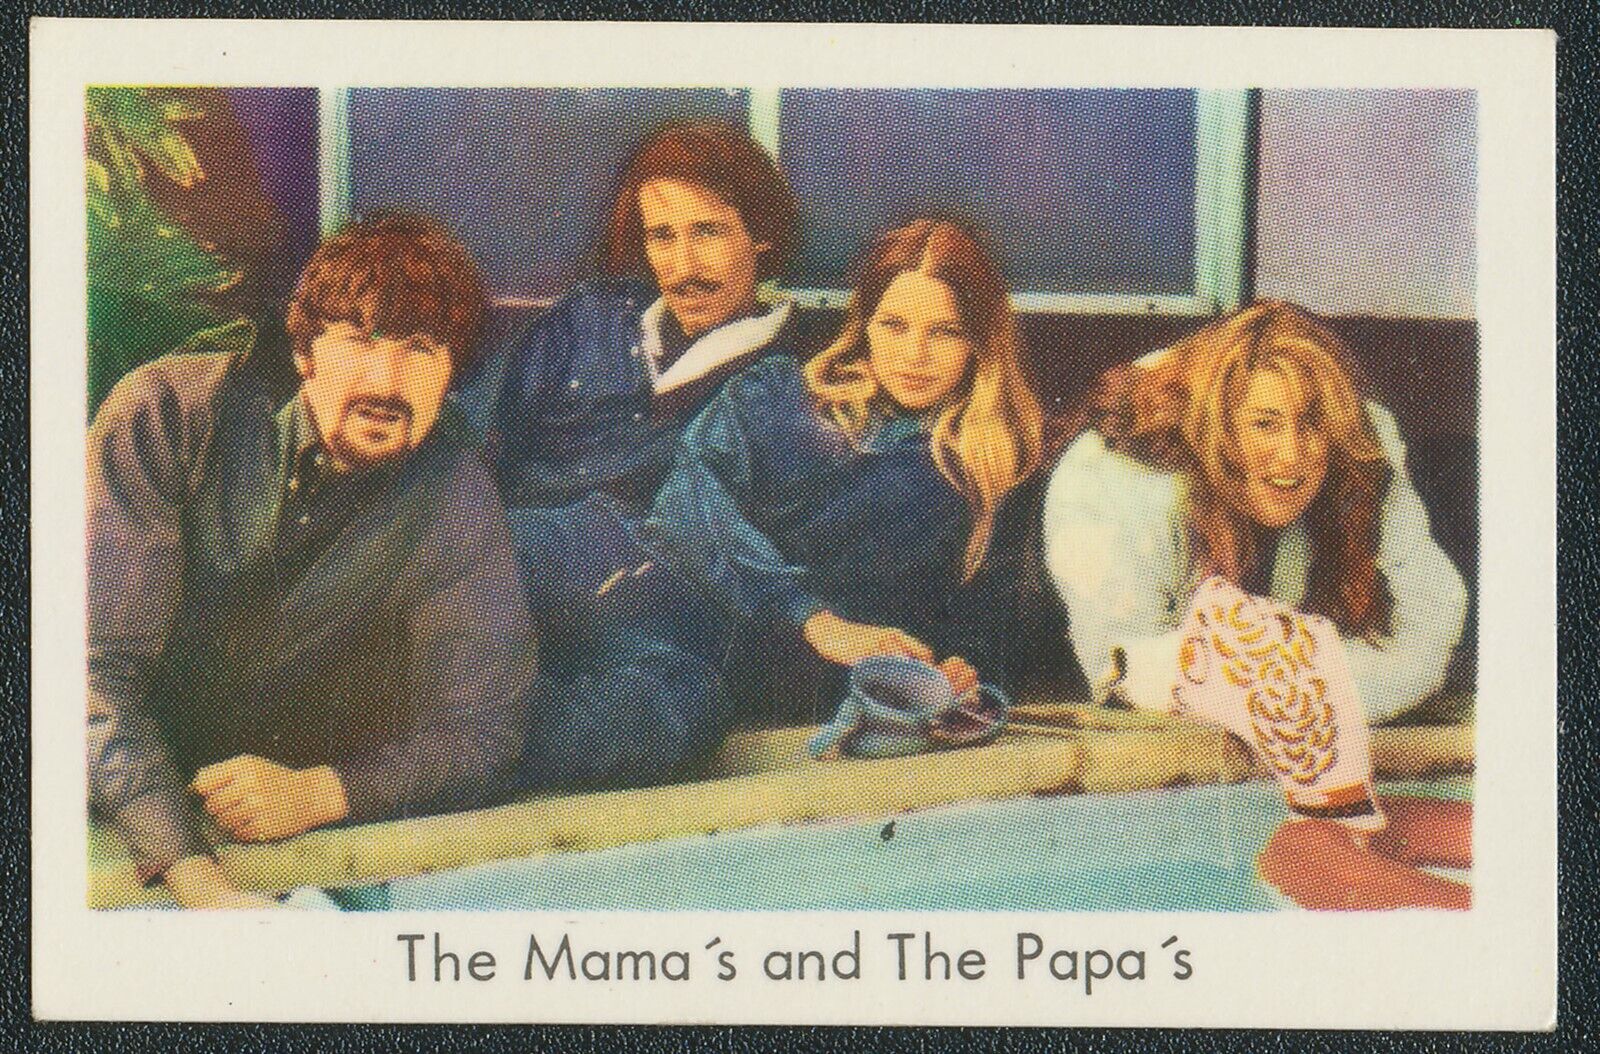 1966 THE MAMA'S AND THE PAPA'S POPBILDER UNNUMBERED SERIES DUTCH GUM TV66-TV68 